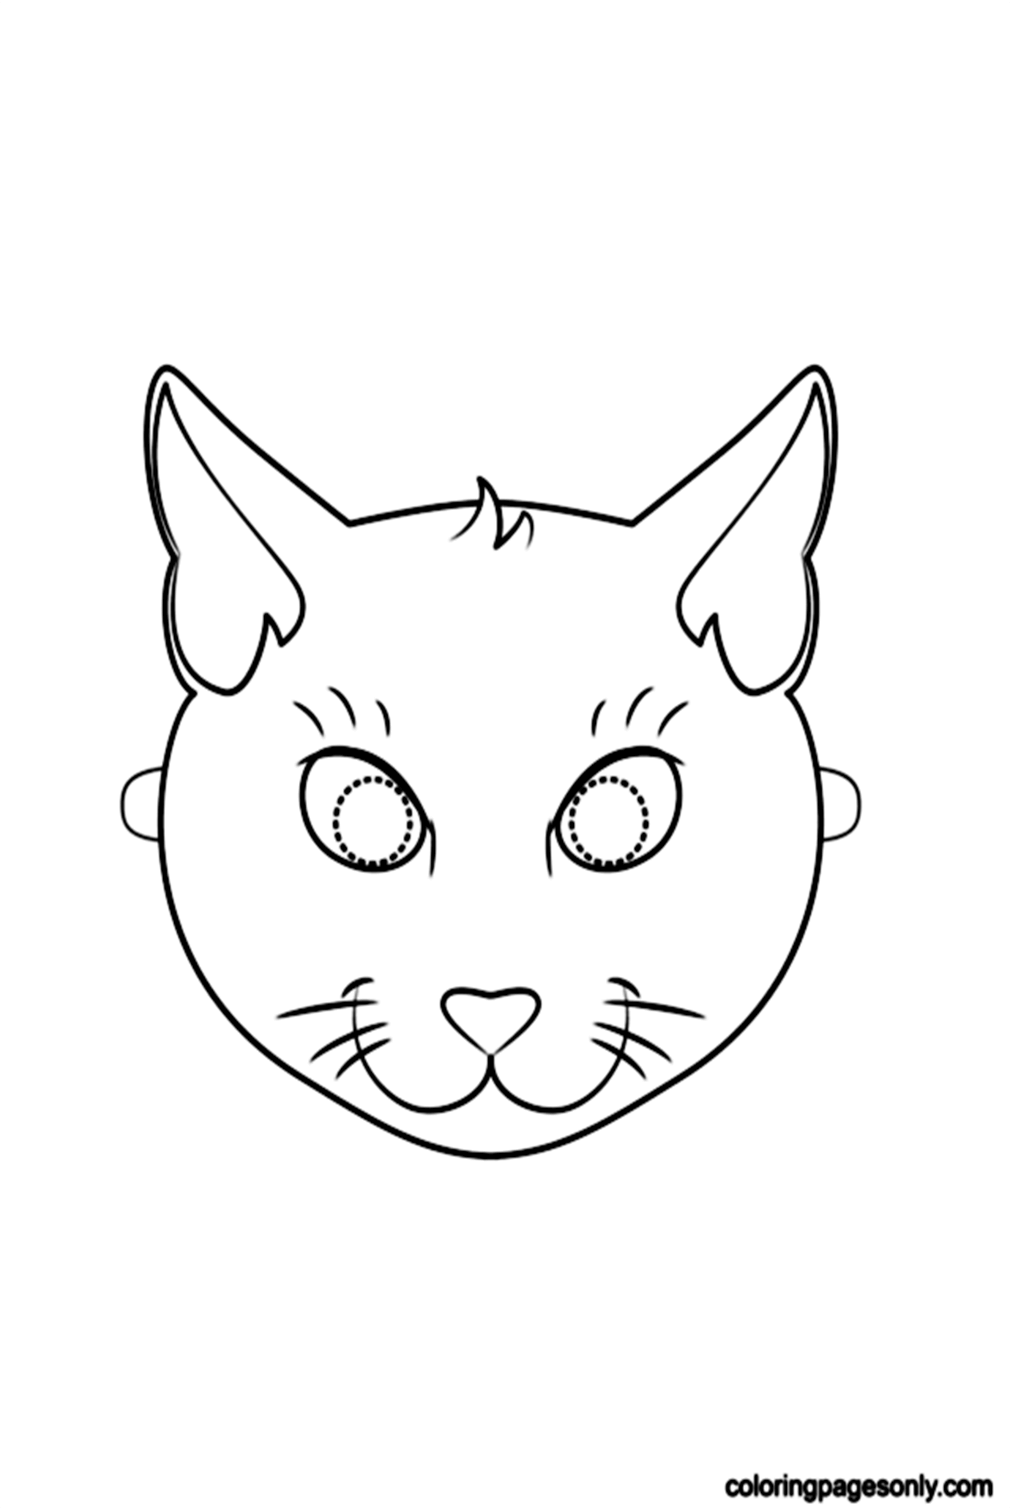 Halloween Mask Coloring Page PSG - Halloween Masks Coloring Pages ...